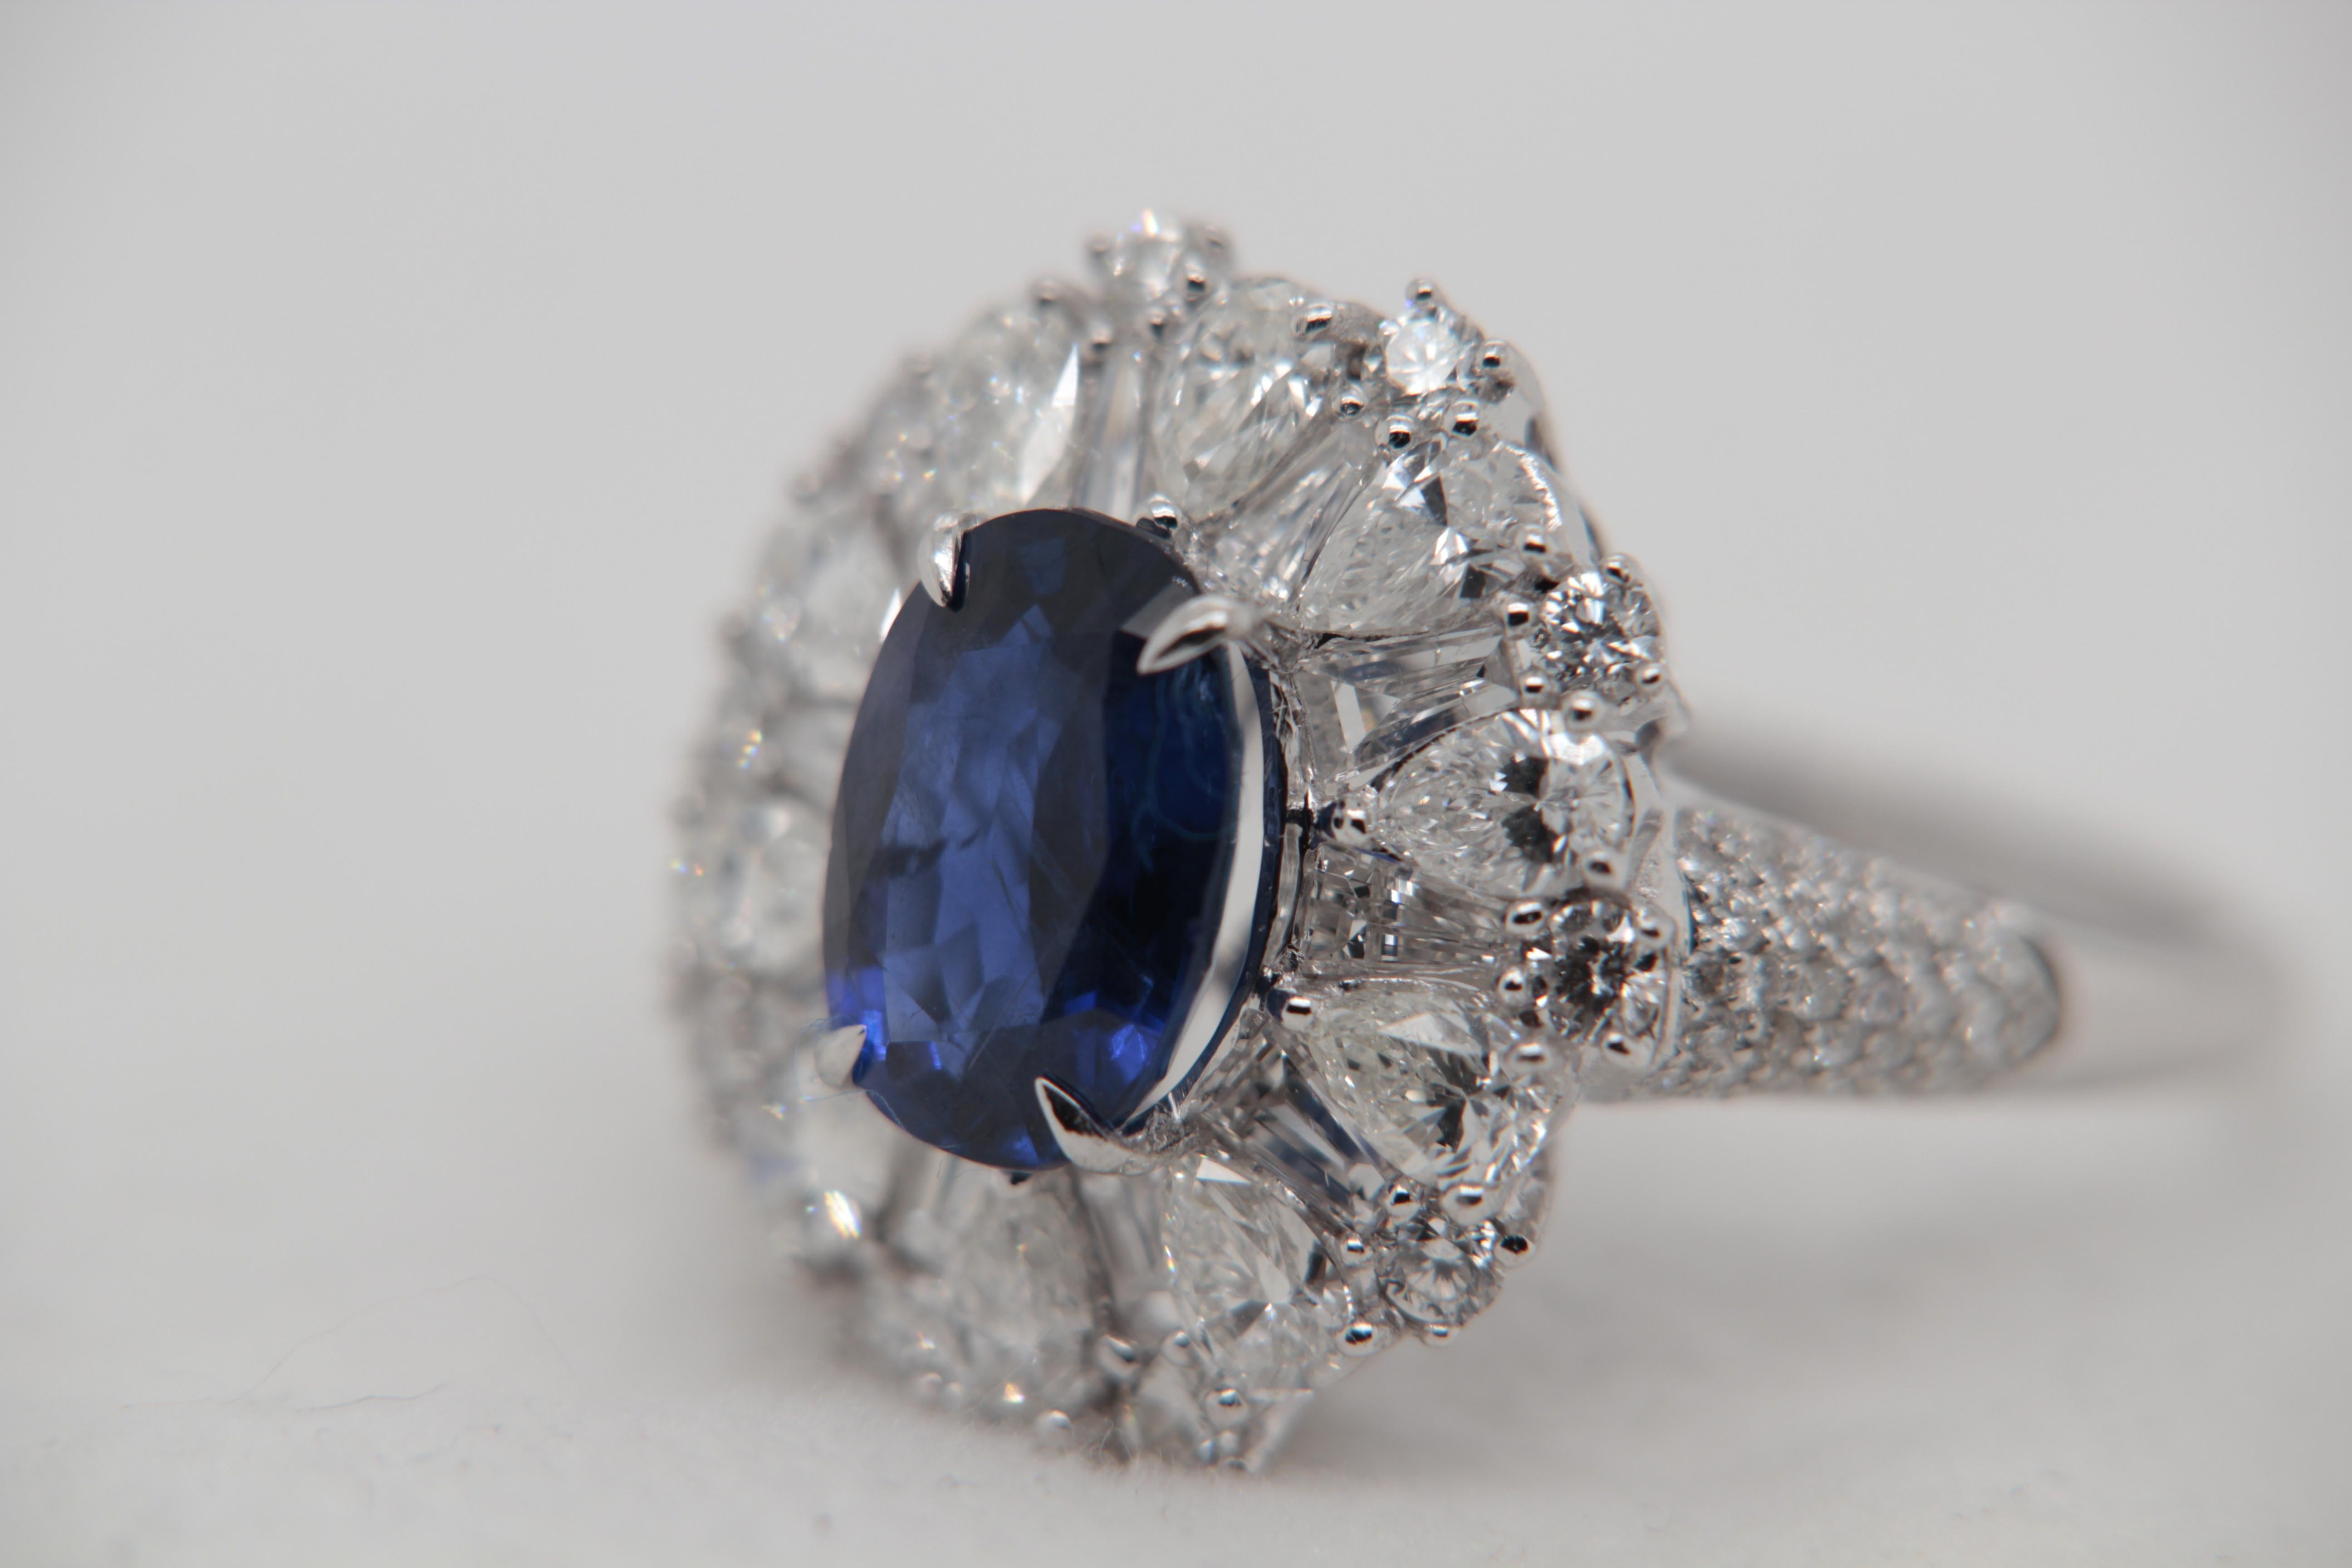 A brand new 3.01 carat Burmese Blue sapphire ring mounted with diamonds in 18 Karat gold. The blue sapphire weighs 3.01 carat and is certified by Gubelin Gemlab as natural, no heat, and Blue. The total diamond weight is 2.65 carat and the total